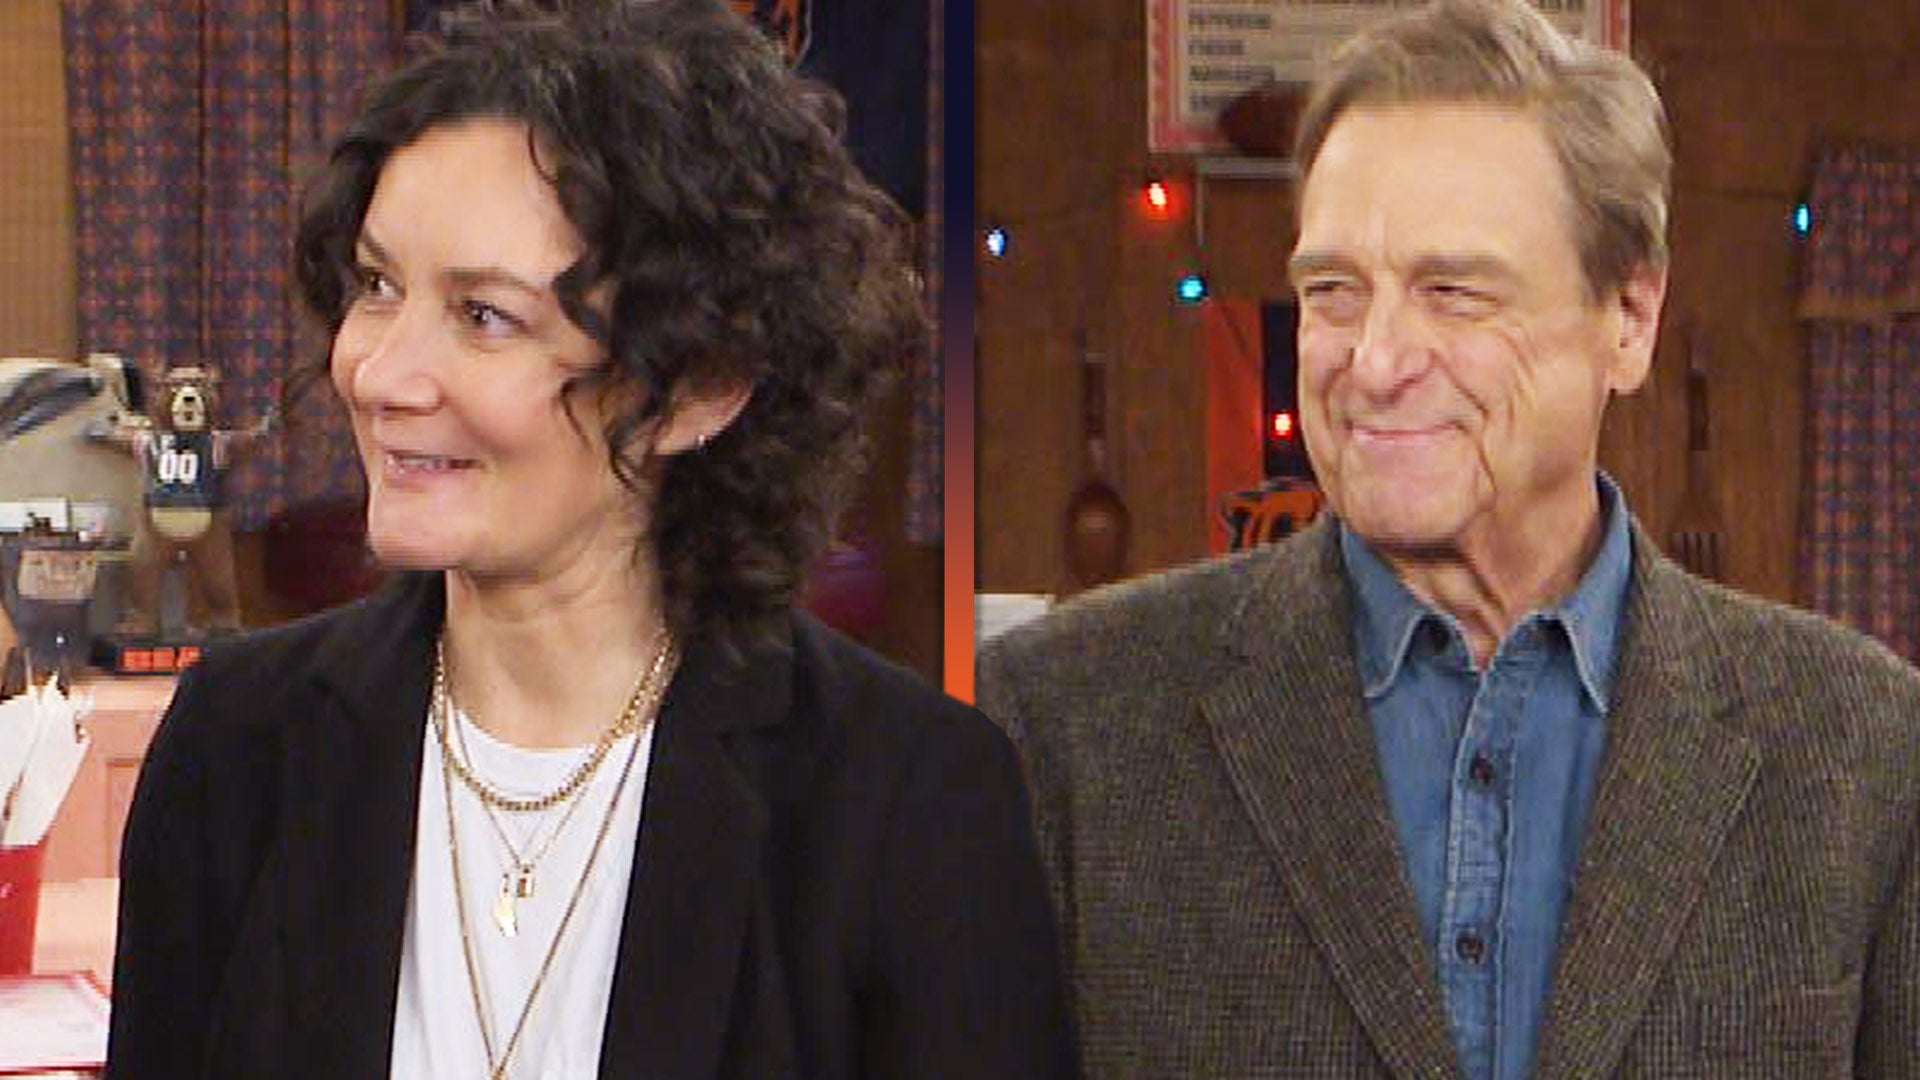 ‘The Conners’: John Goodman, Sara Gilbert and Cast Reflect on 100 Episodes!